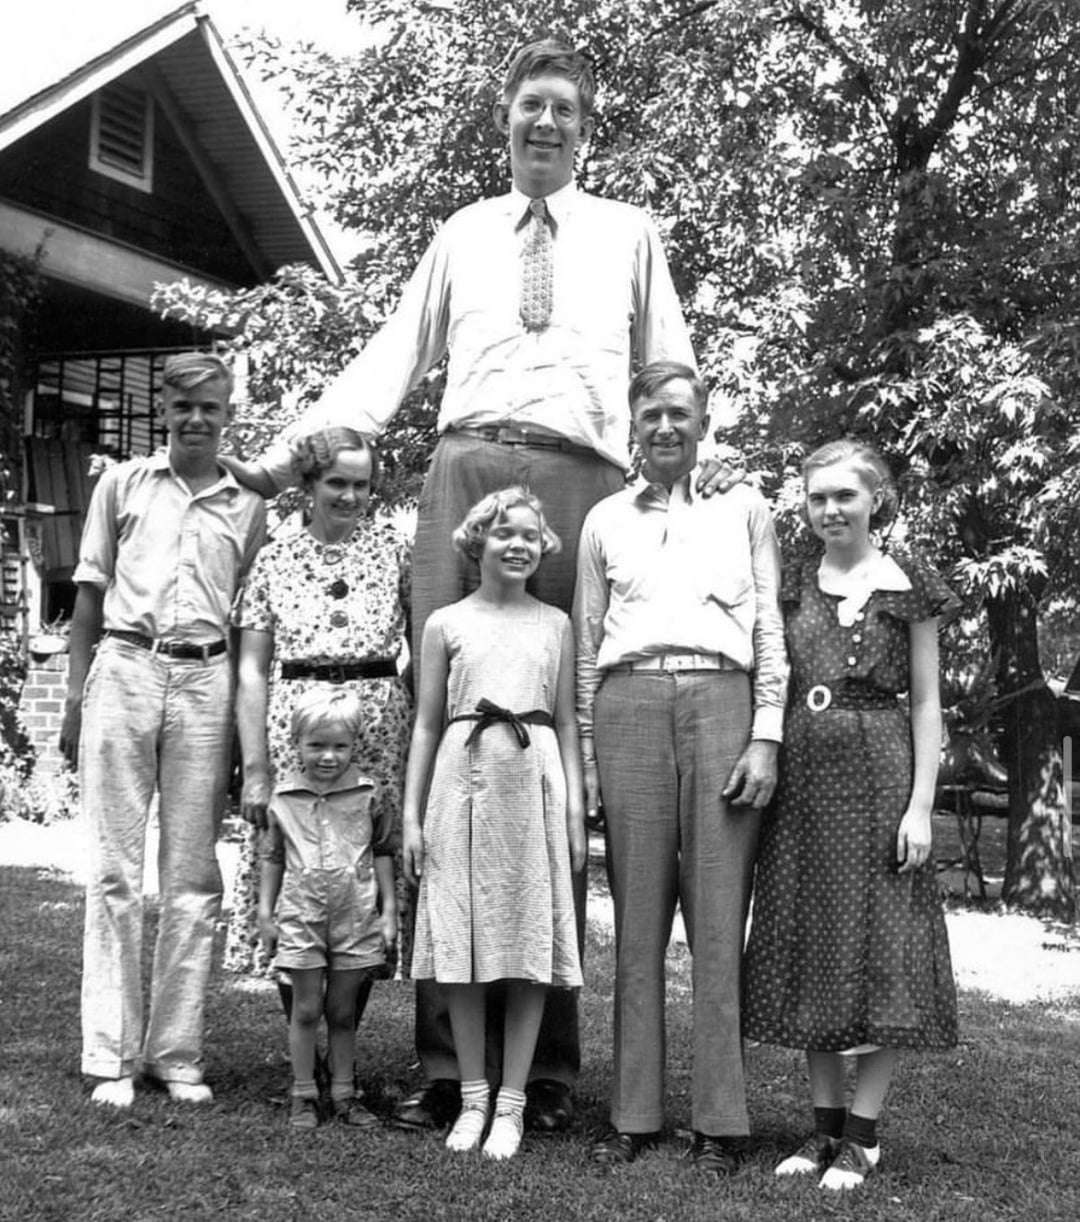 image showing Robert Wadlow, the tallest human ever recorded next to is parents and siblings, 1935